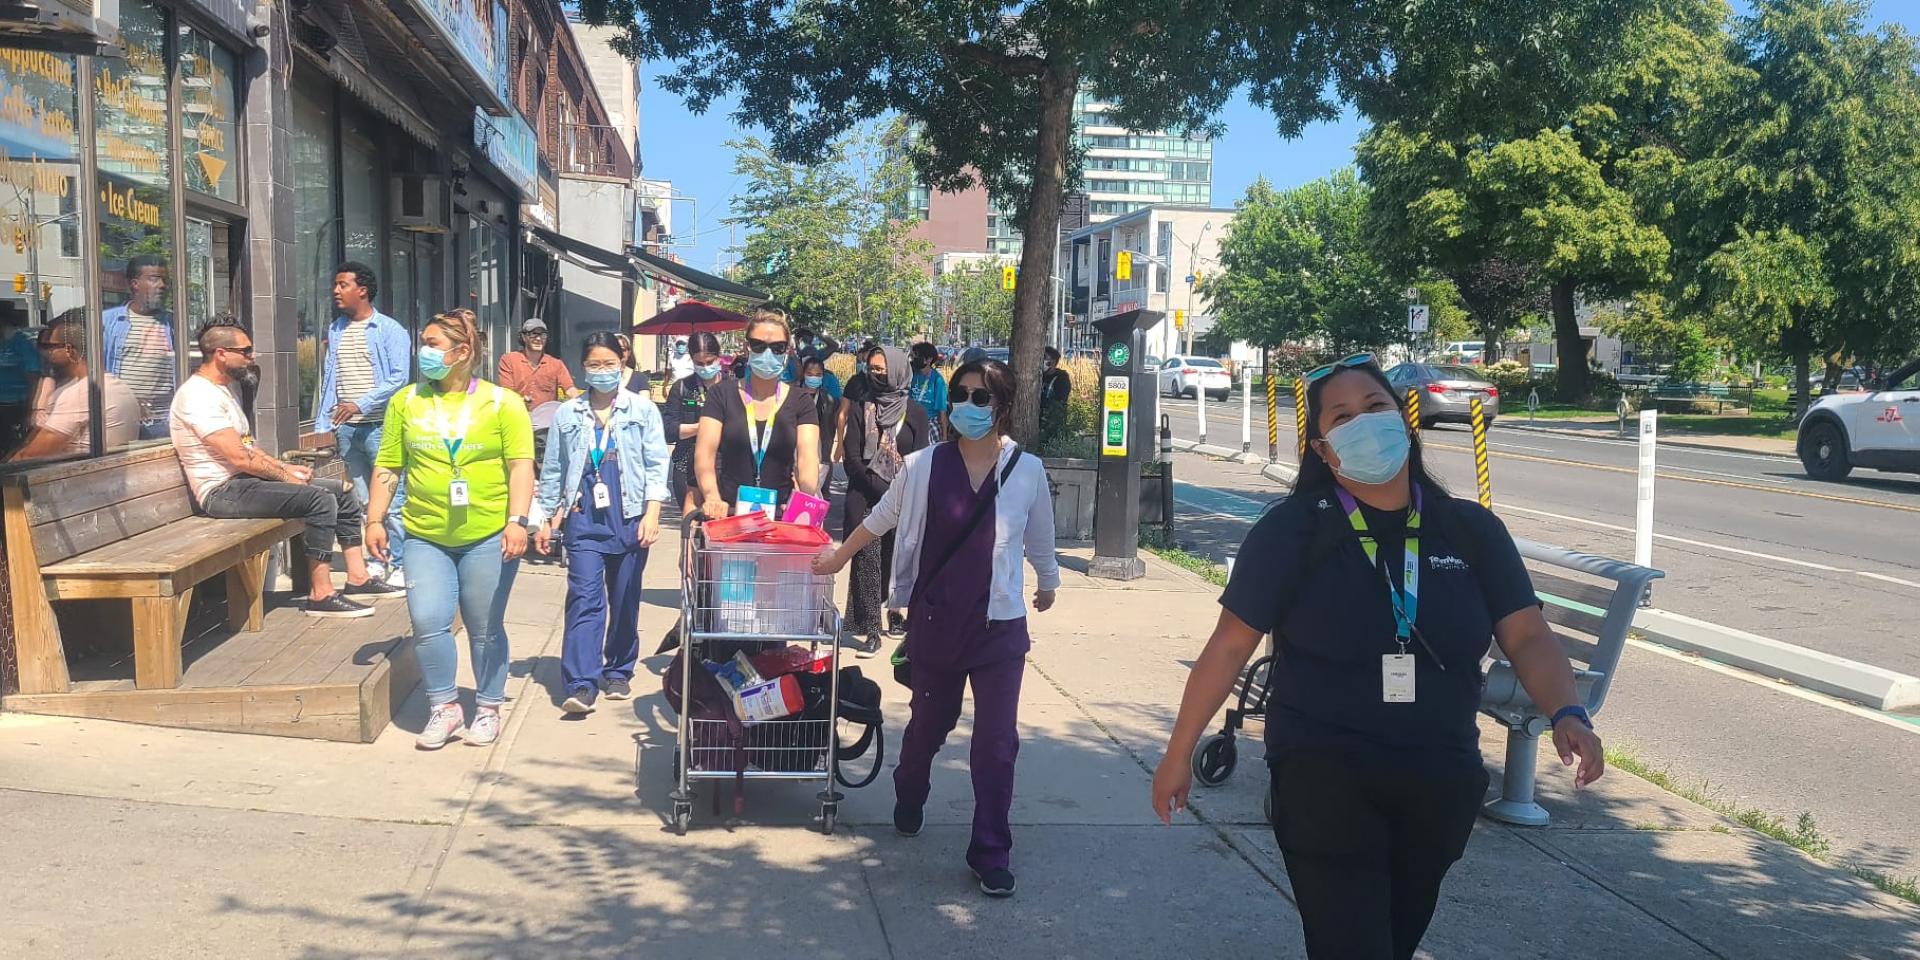 Nurses and clerks from ETHP's mobile vaccination team walk along the streets of East Toronto to administer vaccines to residents.